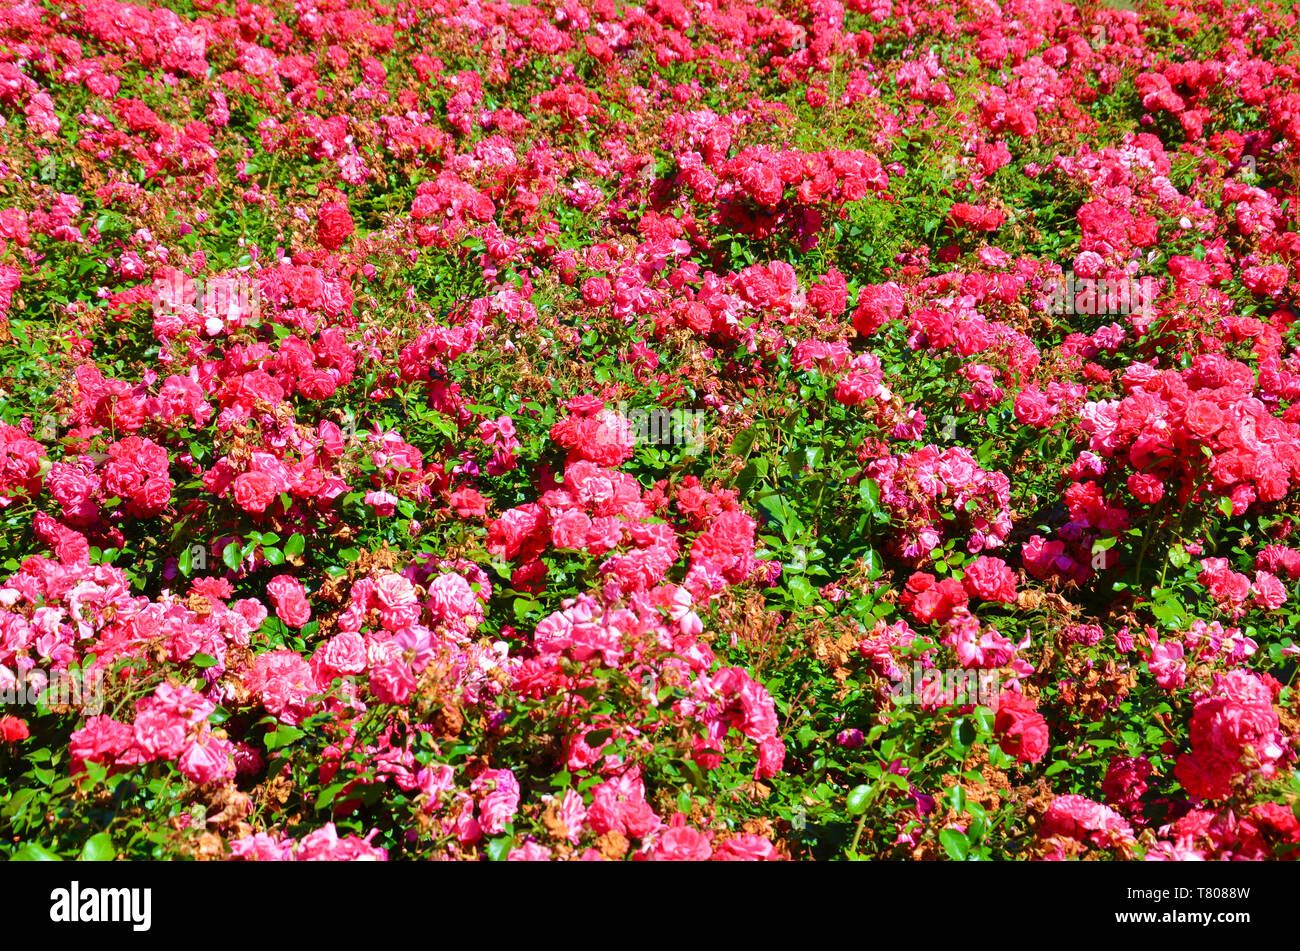 Wonderful bush of wild fuchsia roses taken on a sunny spring day. These roses have dark pink colored blossoms and green leaves. Roses are one of the most popular flowers. Stock Photo